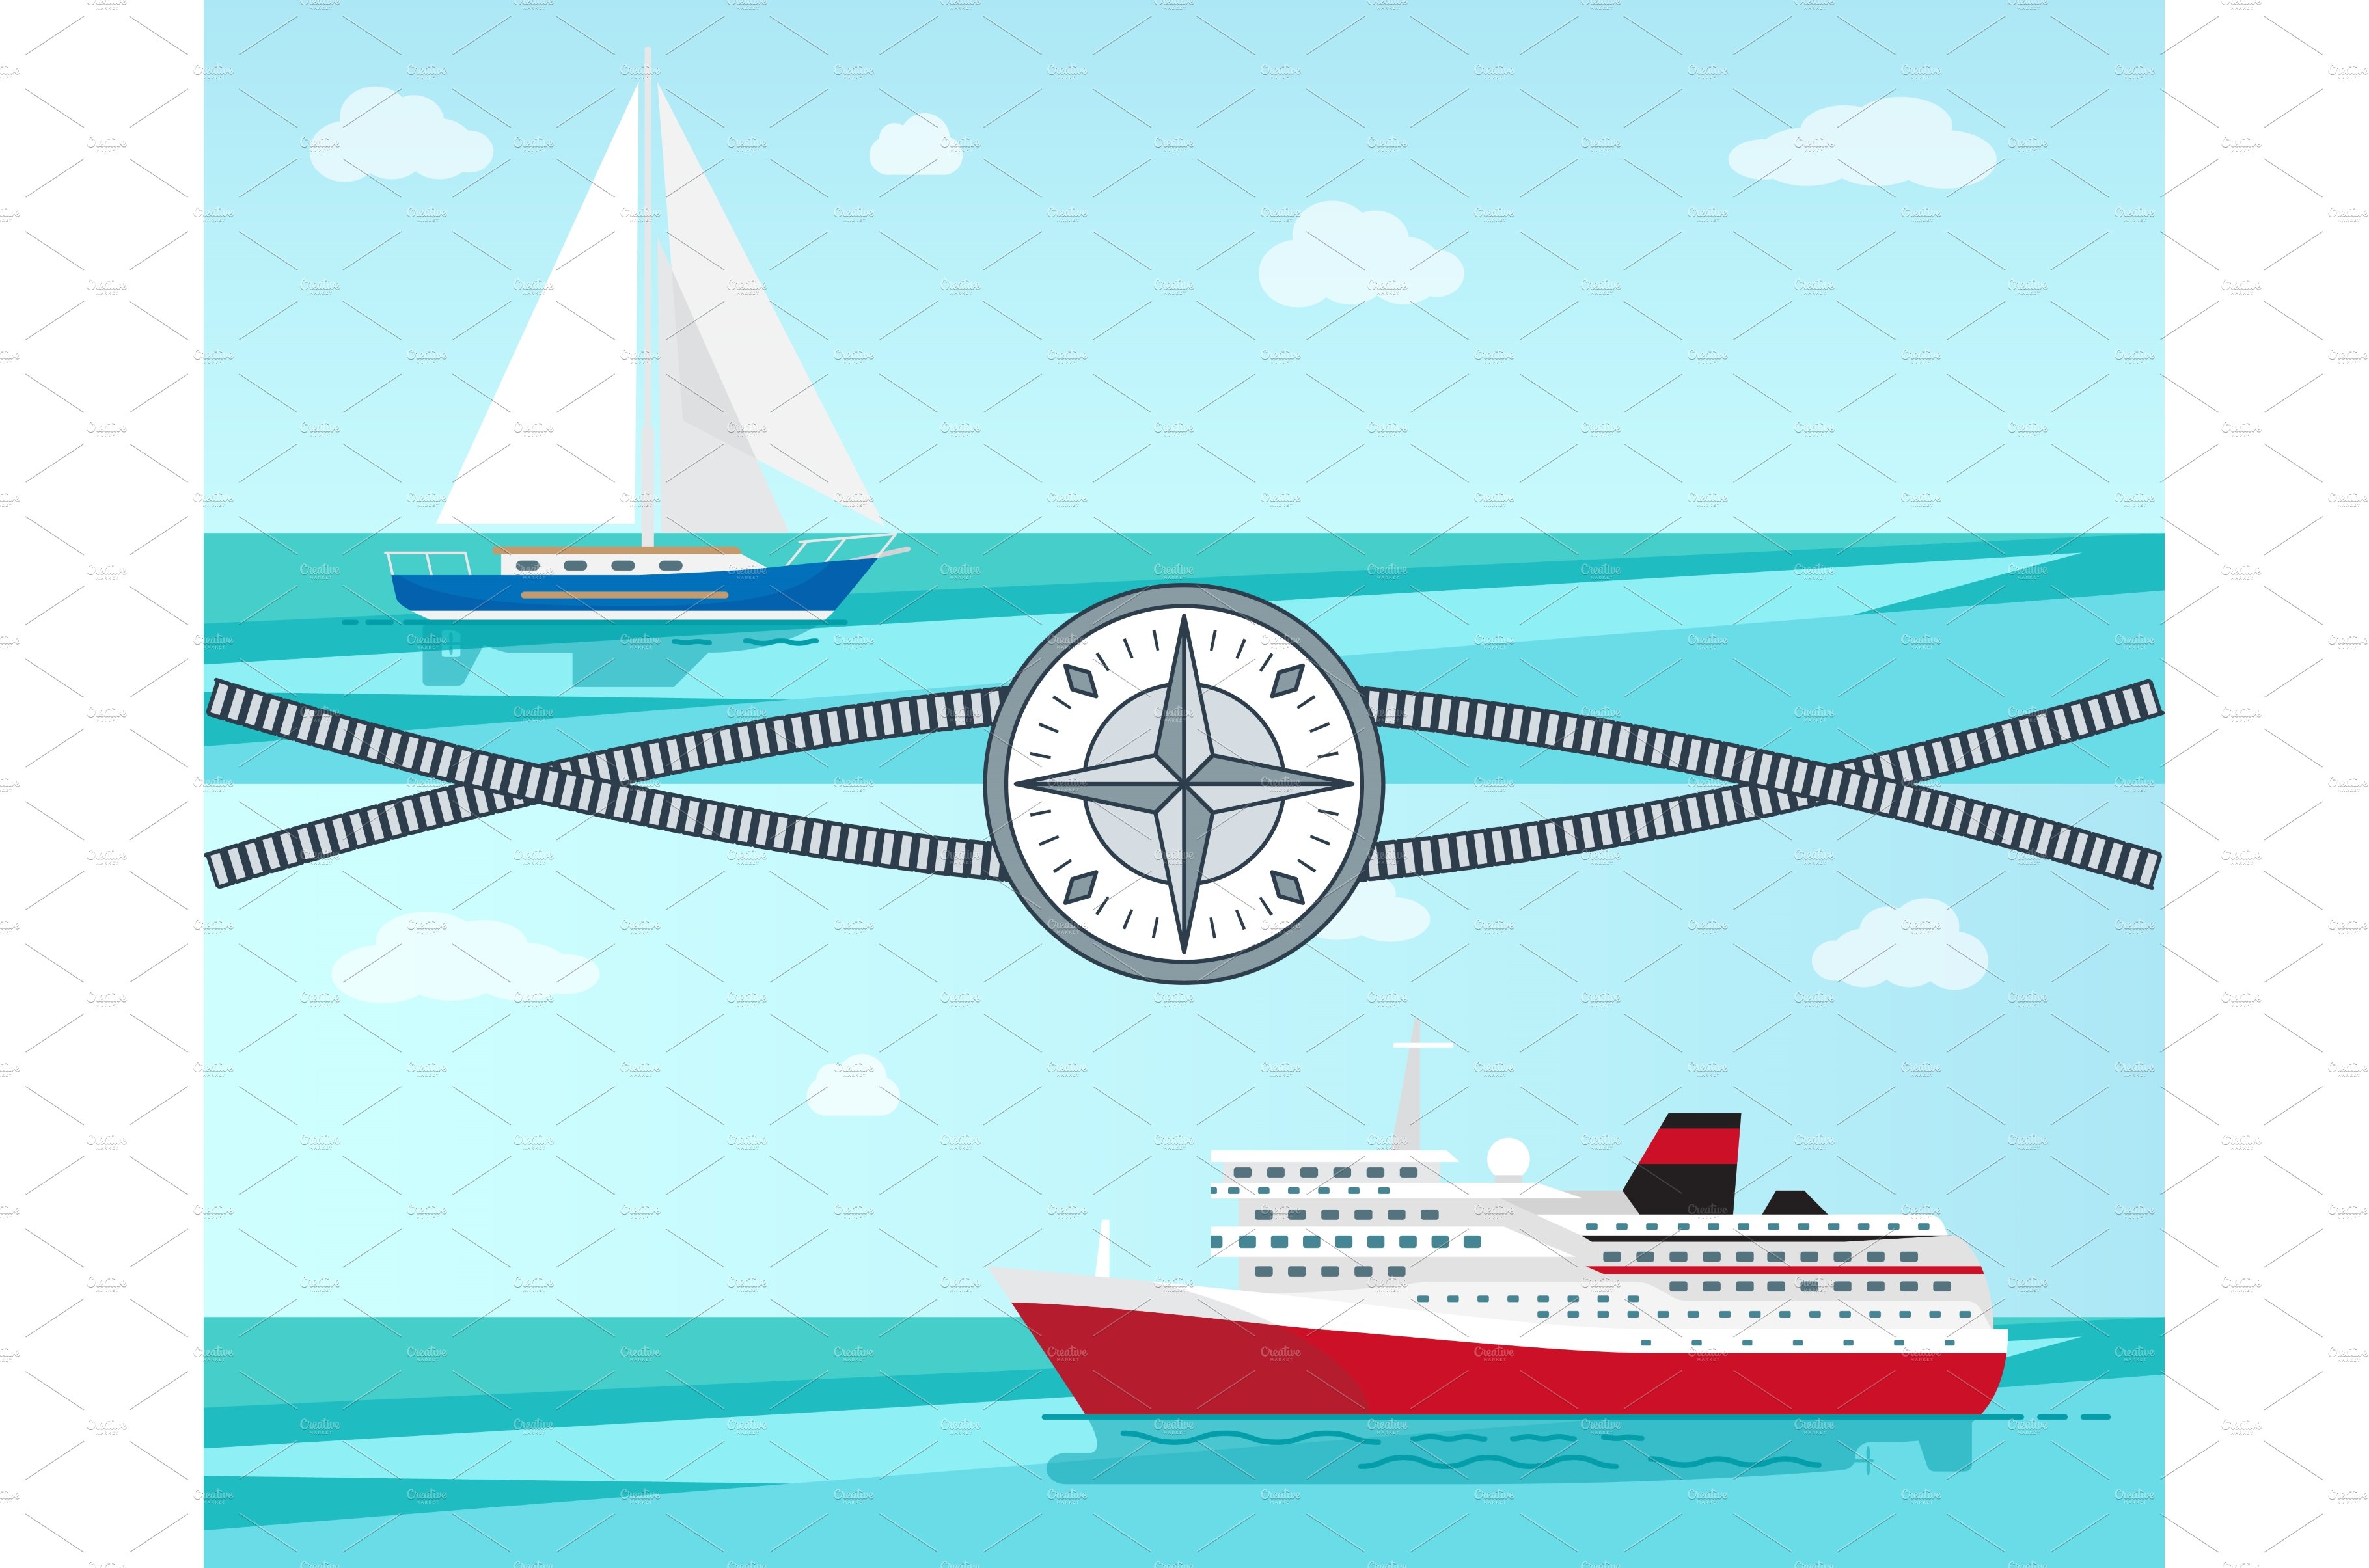 Sailboat and Ship with Ropes Vector cover image.